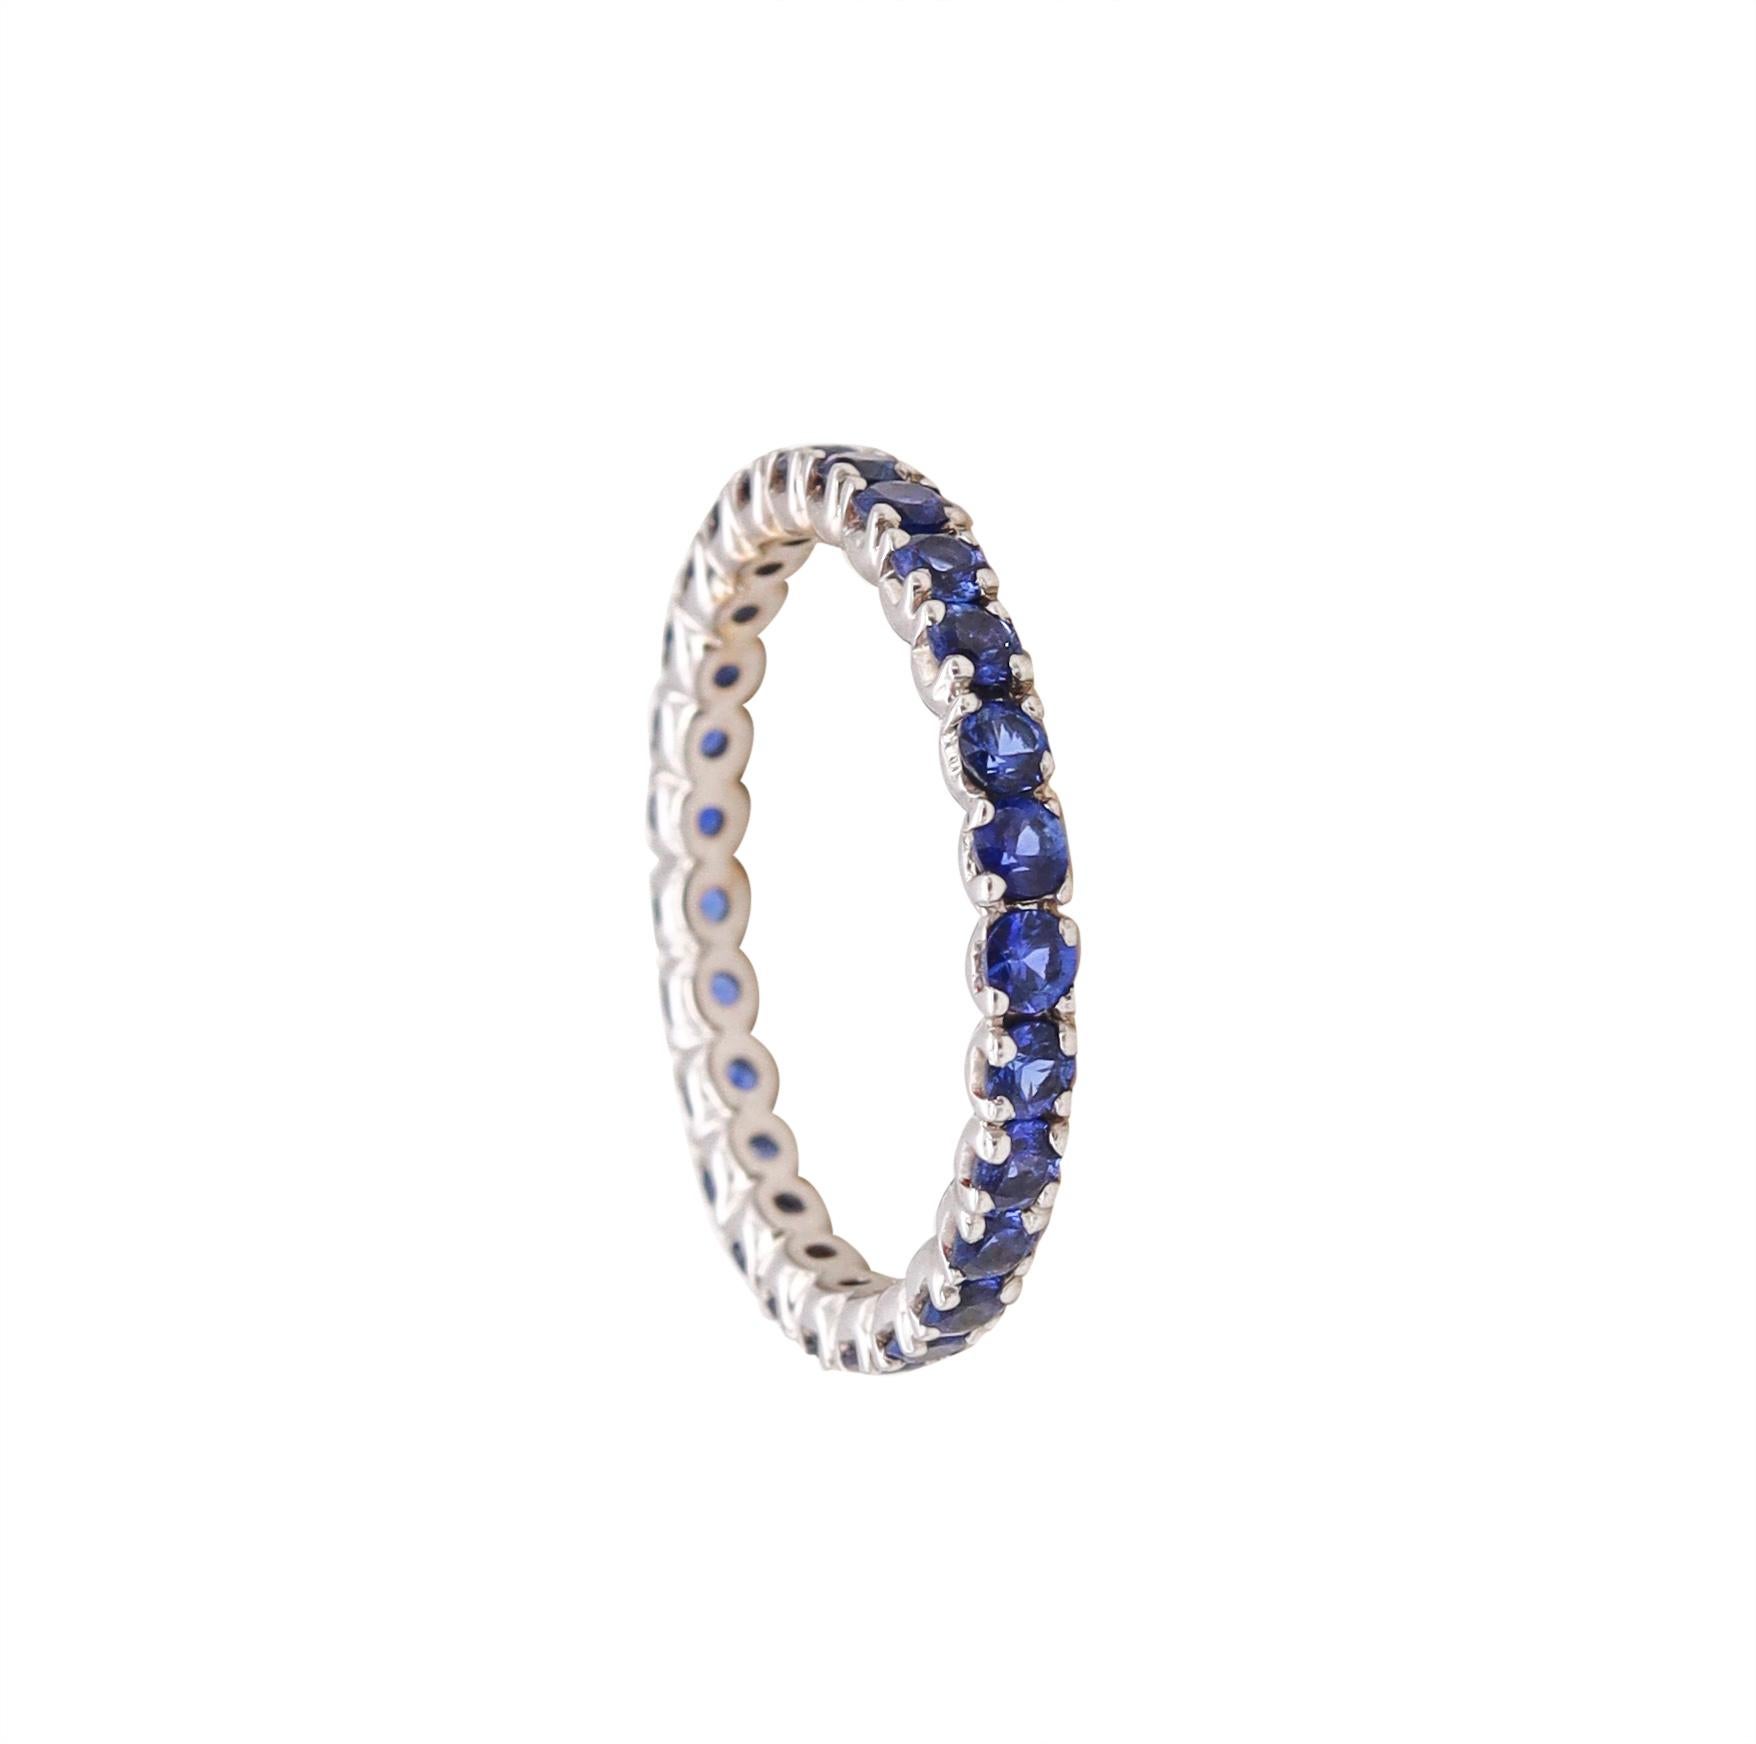 Eternity ring with Blue Sapphires.

Modern full band carefully crafted in solid white gold of 18 karats, with high polished finish. It is mounted in a double row of prongs, with 27 calibrated round brilliant cuts of Ceylon Blue Sapphires

Sapphires: